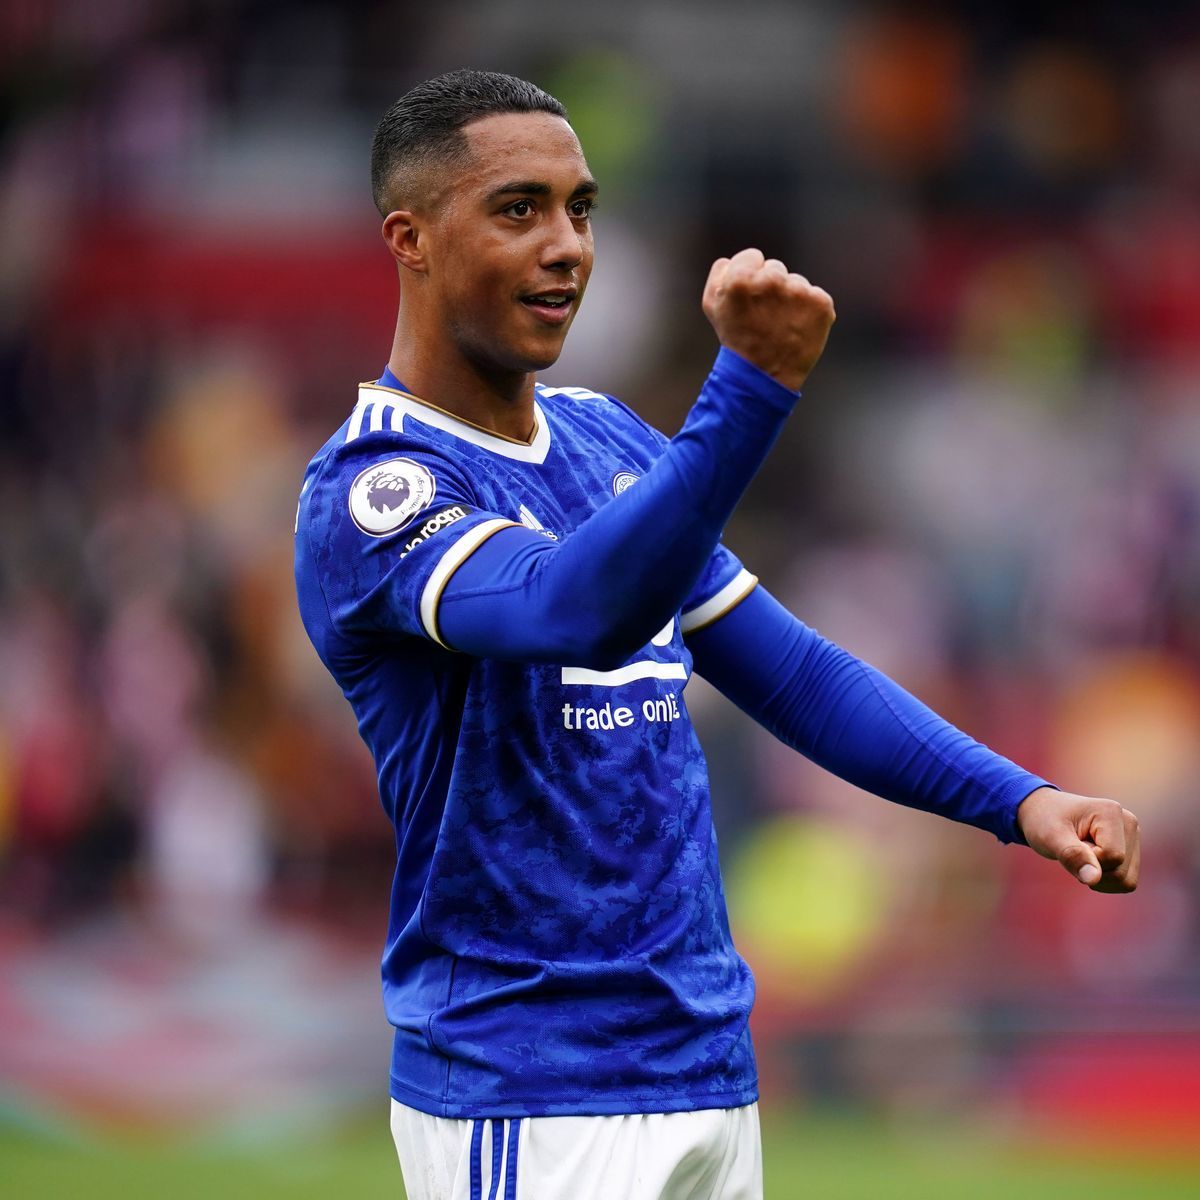 Youri Tielemans, Leicester City player